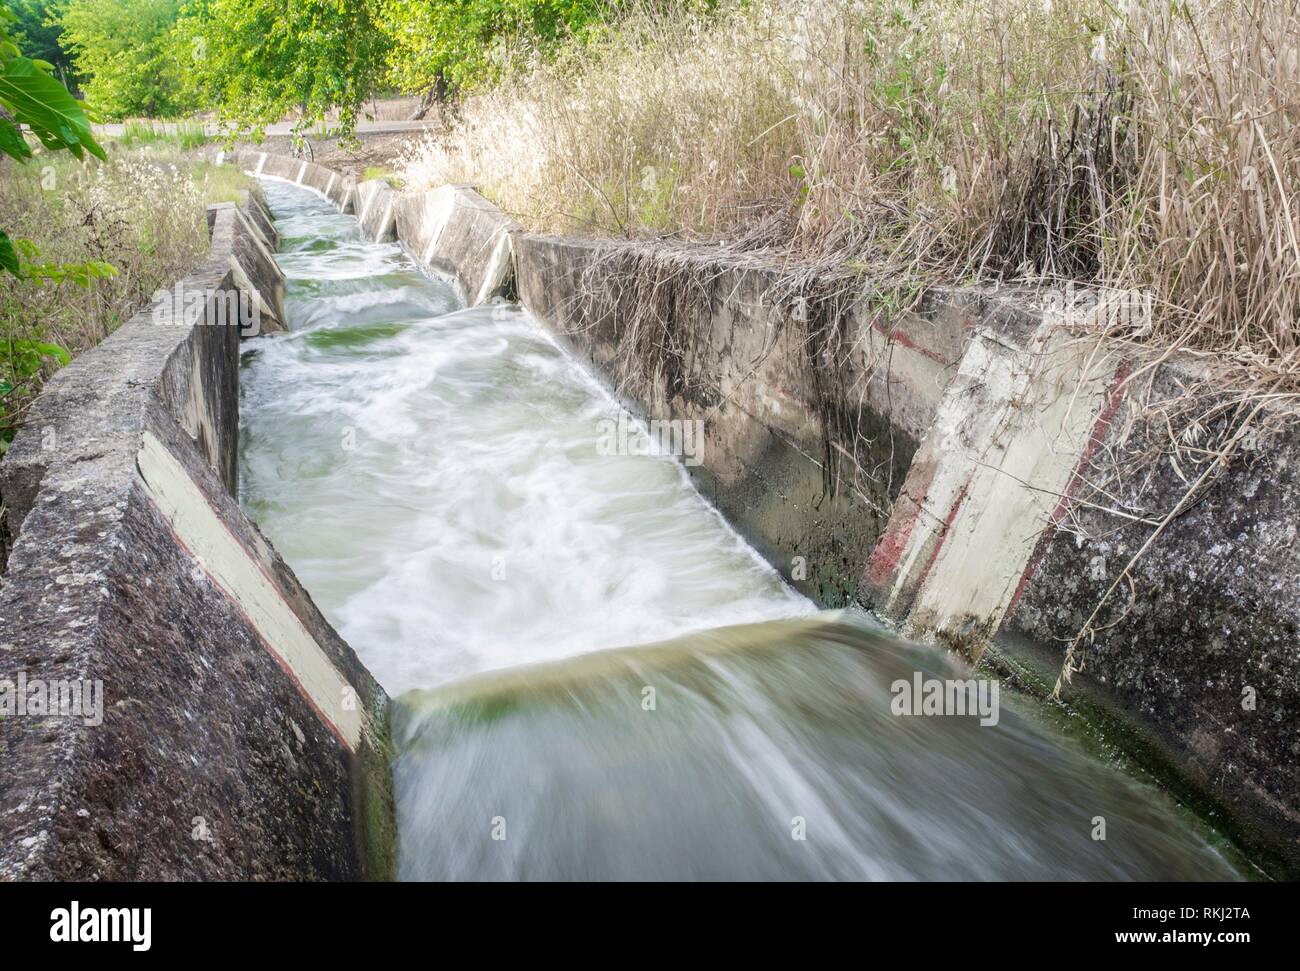 Concrete-lined waterfalls portion at irrigation canal, Low Guadiana Lands, Vegas Bajas, Extremadura, Spain. Stock Photo